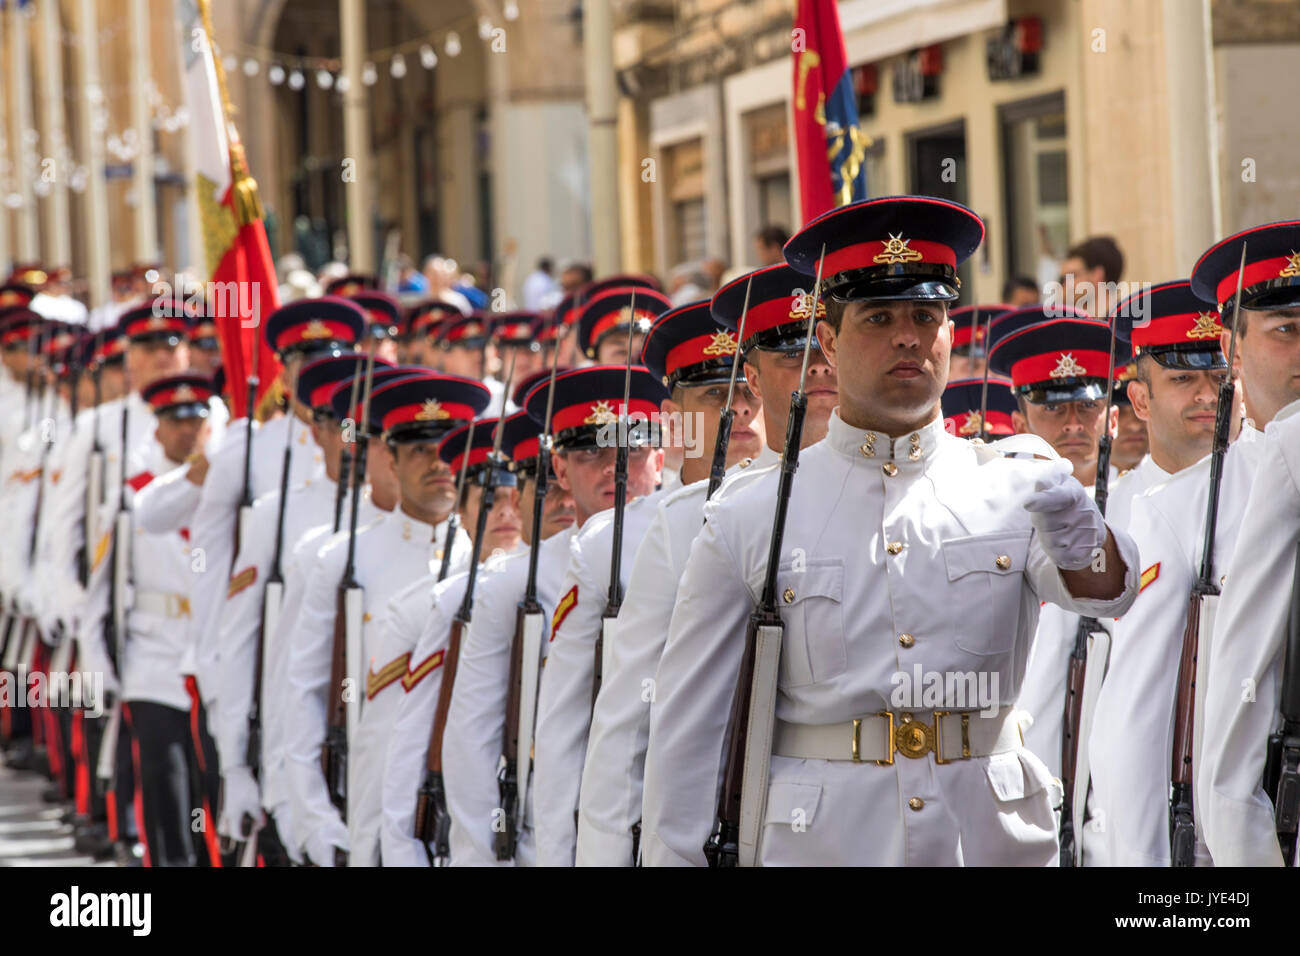 Parade of the Maltese Army, Armed Forces of Malta, in Parade uniform, in the old town of Valetta, on the Republic Street, Stock Photo